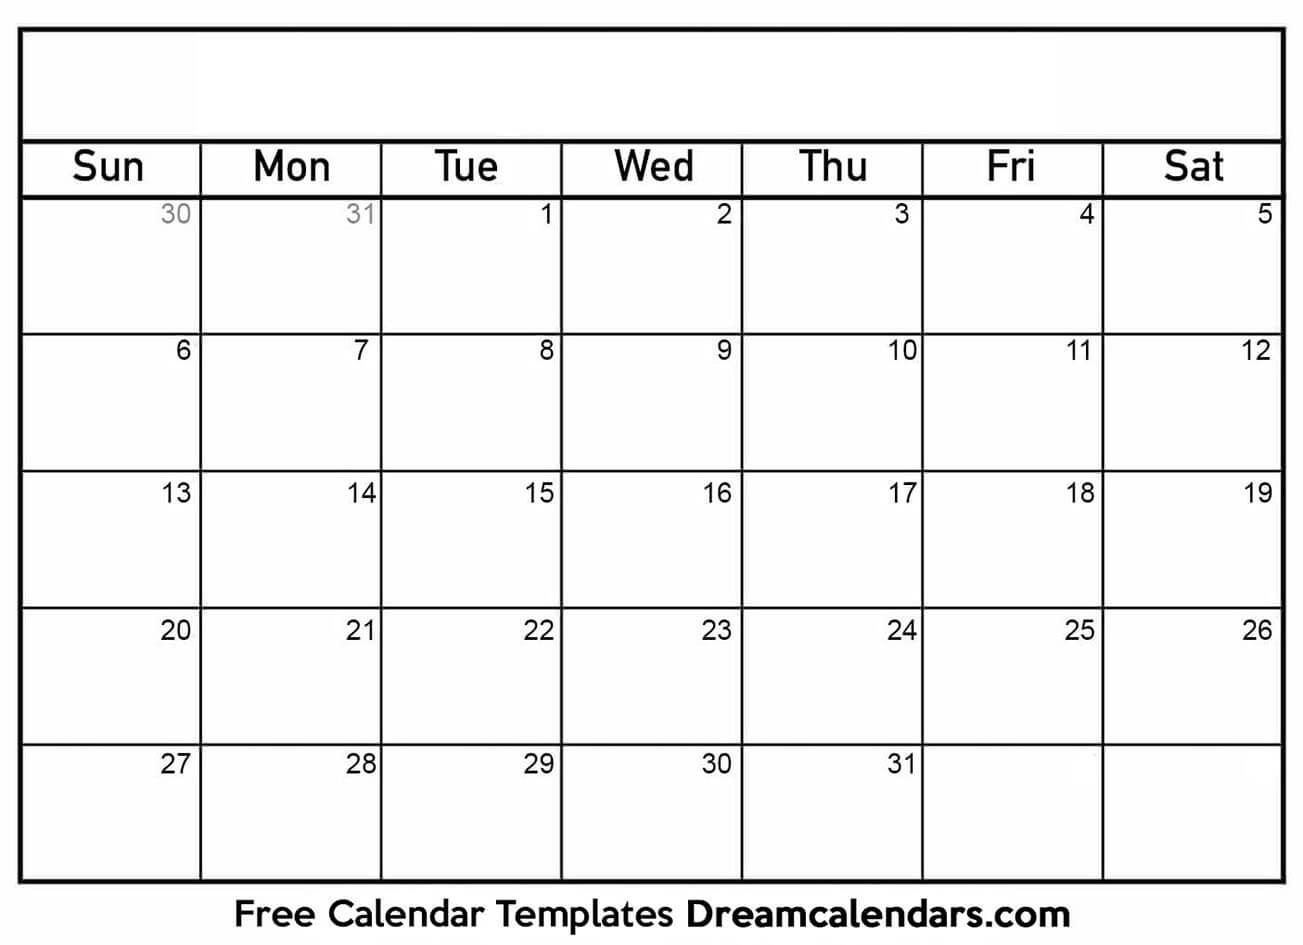 Dashing Blank Calenders With No Dates In 2020 | Free